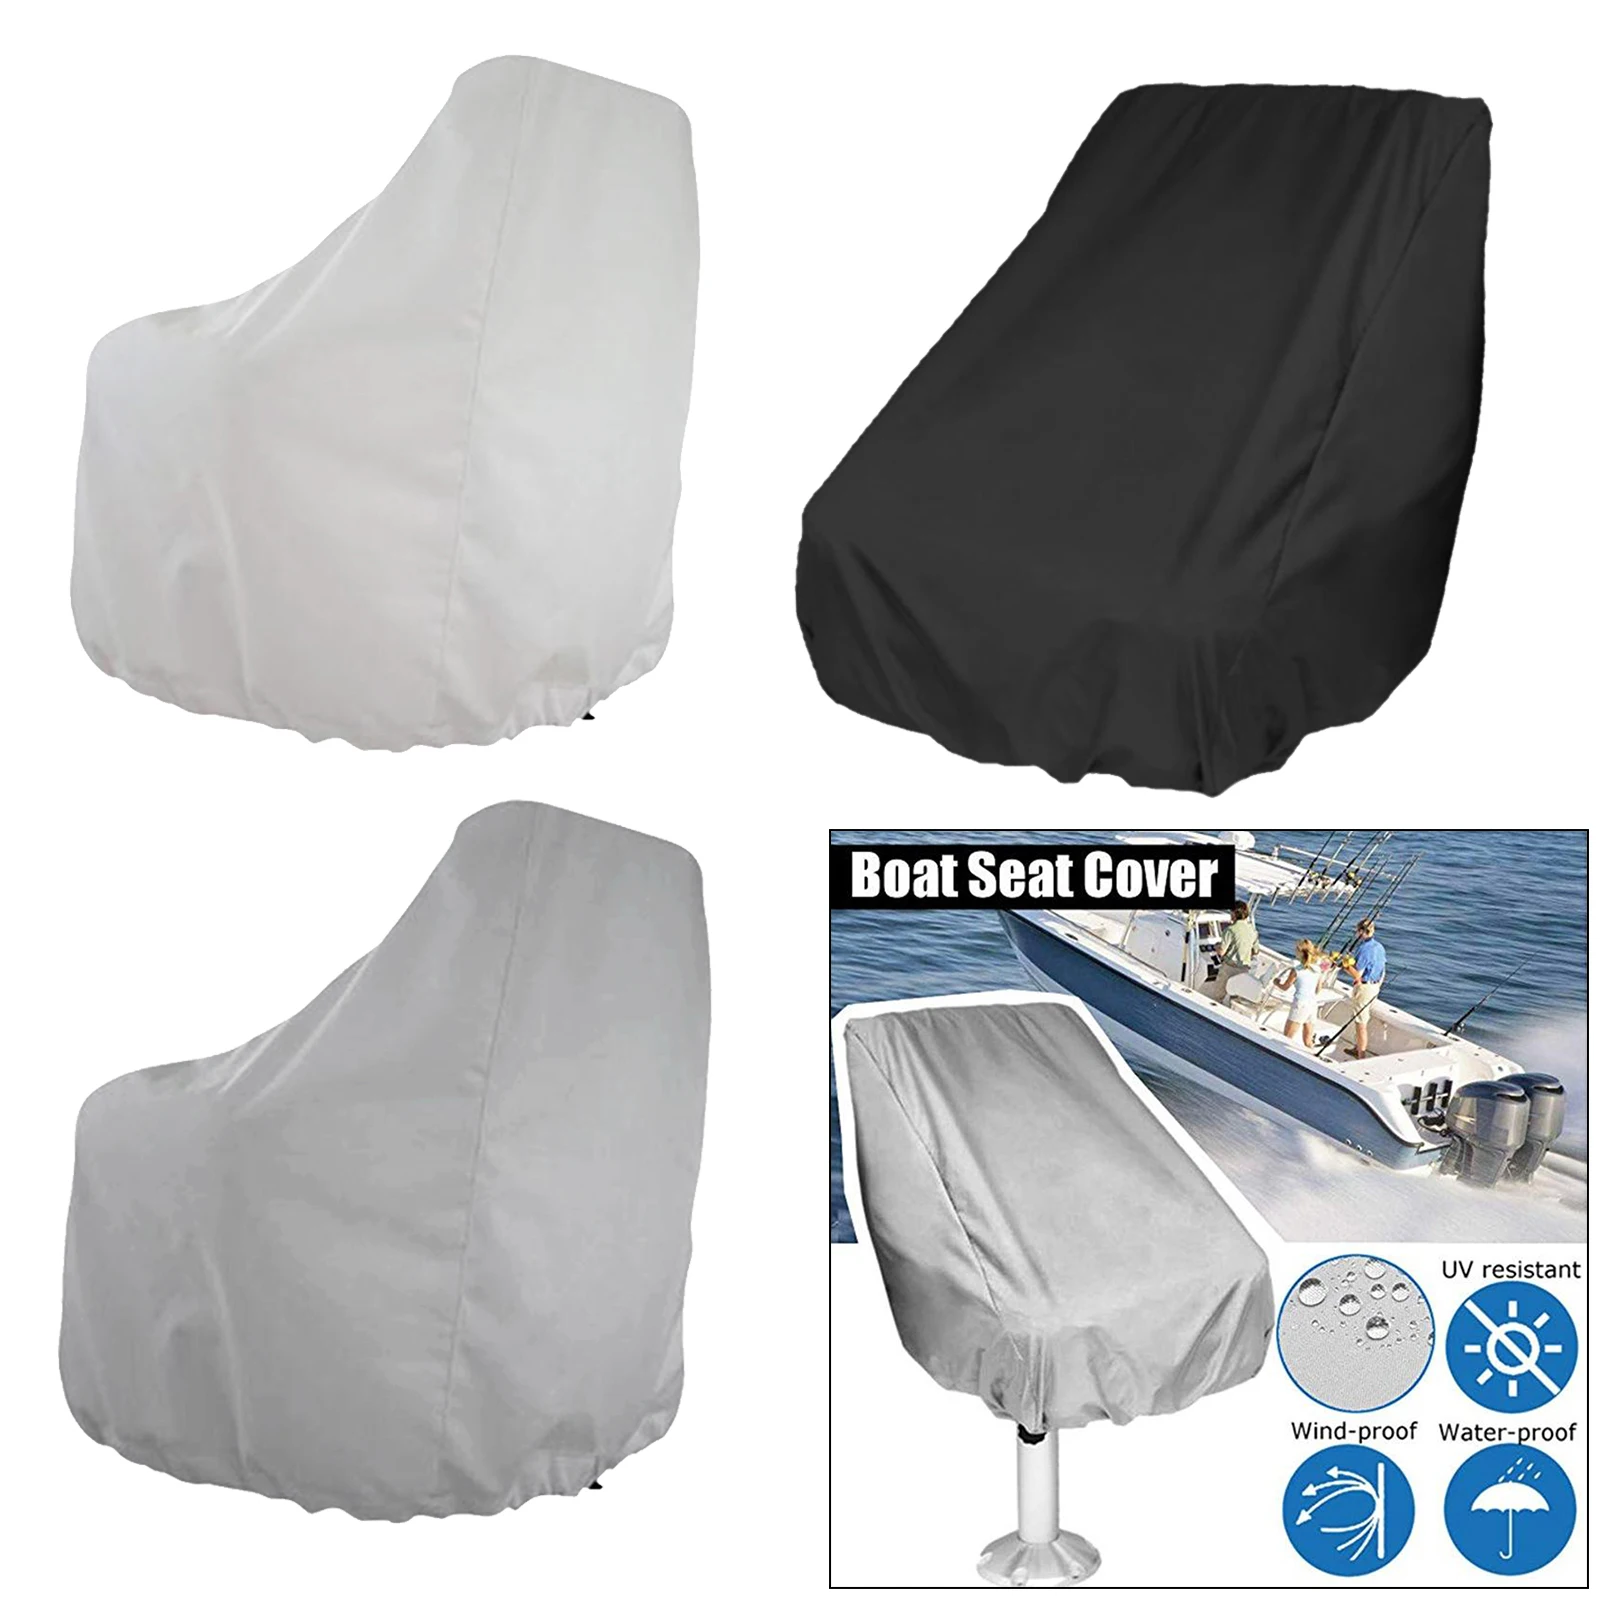 Durable Boat Seat Cover Yacht Heavy-Duty UV-Resistant Ship Helm Chair Cover